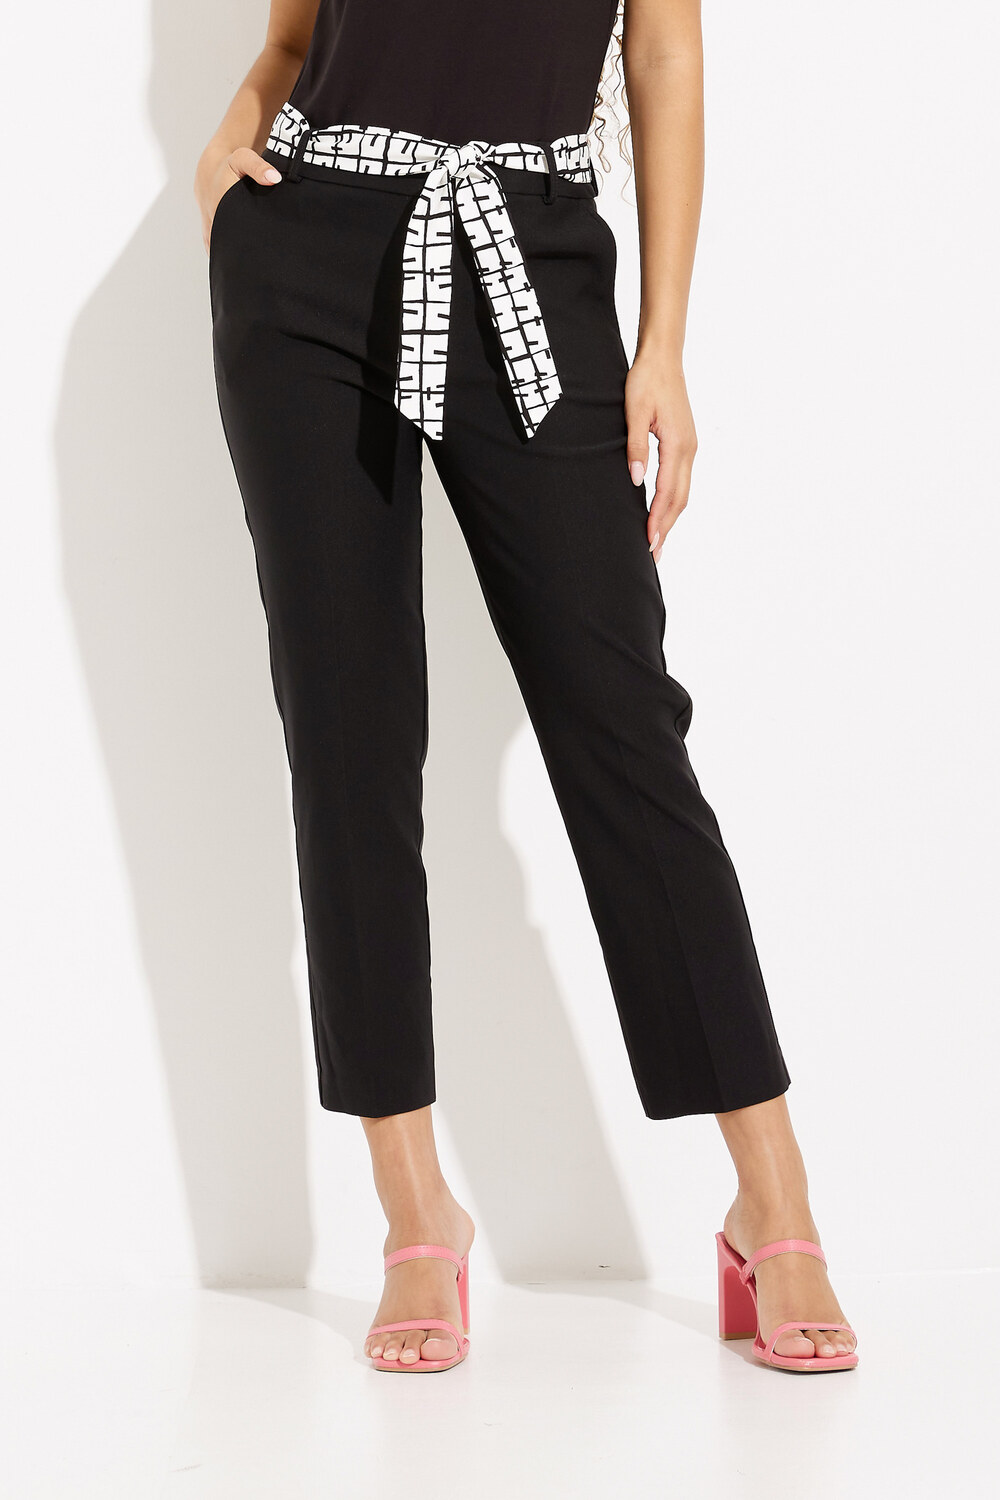 Belted & Cropped Pant Style 232021. Black/multi